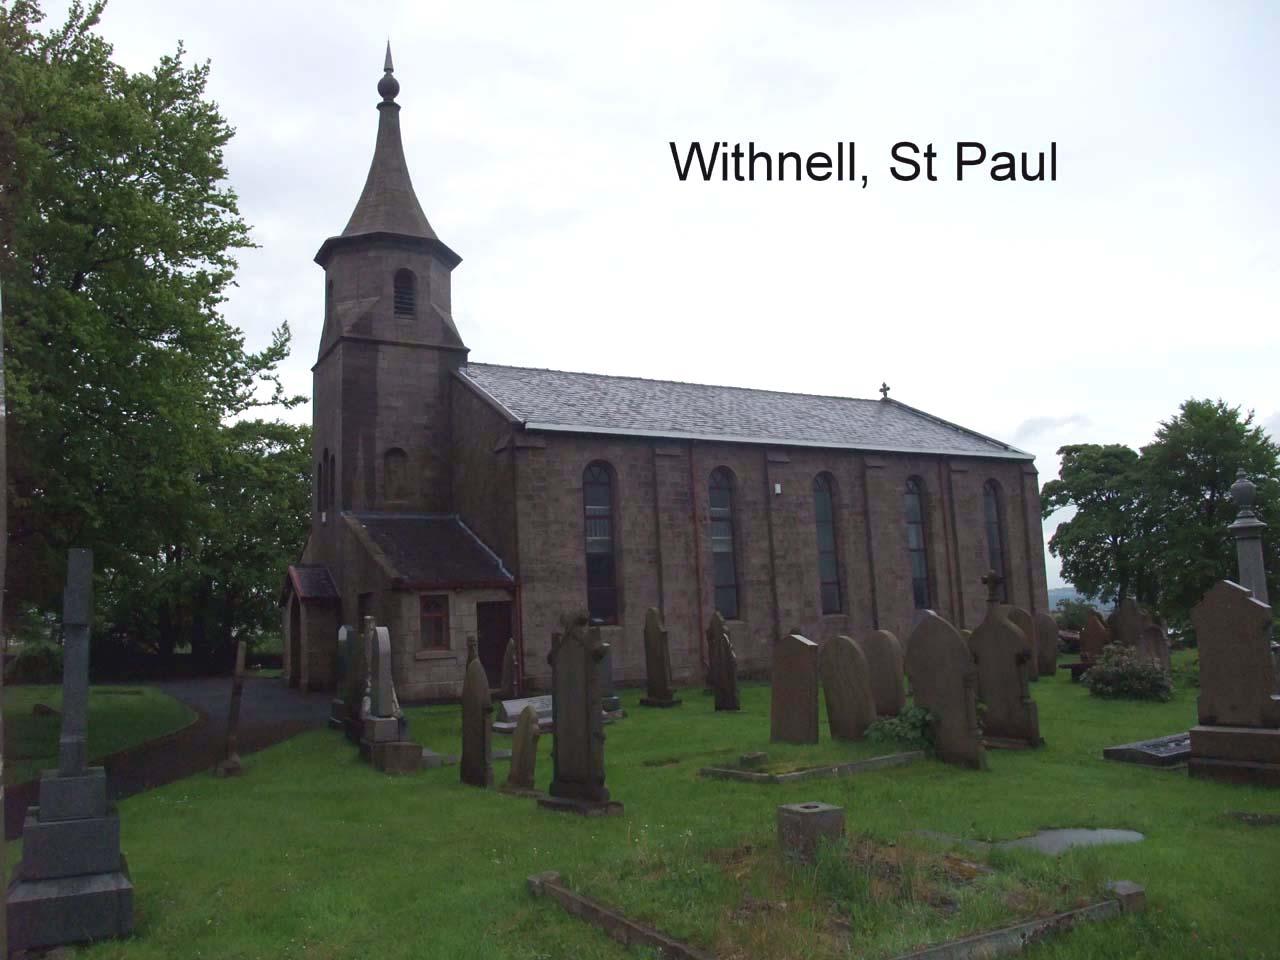 St Paul, Withnell